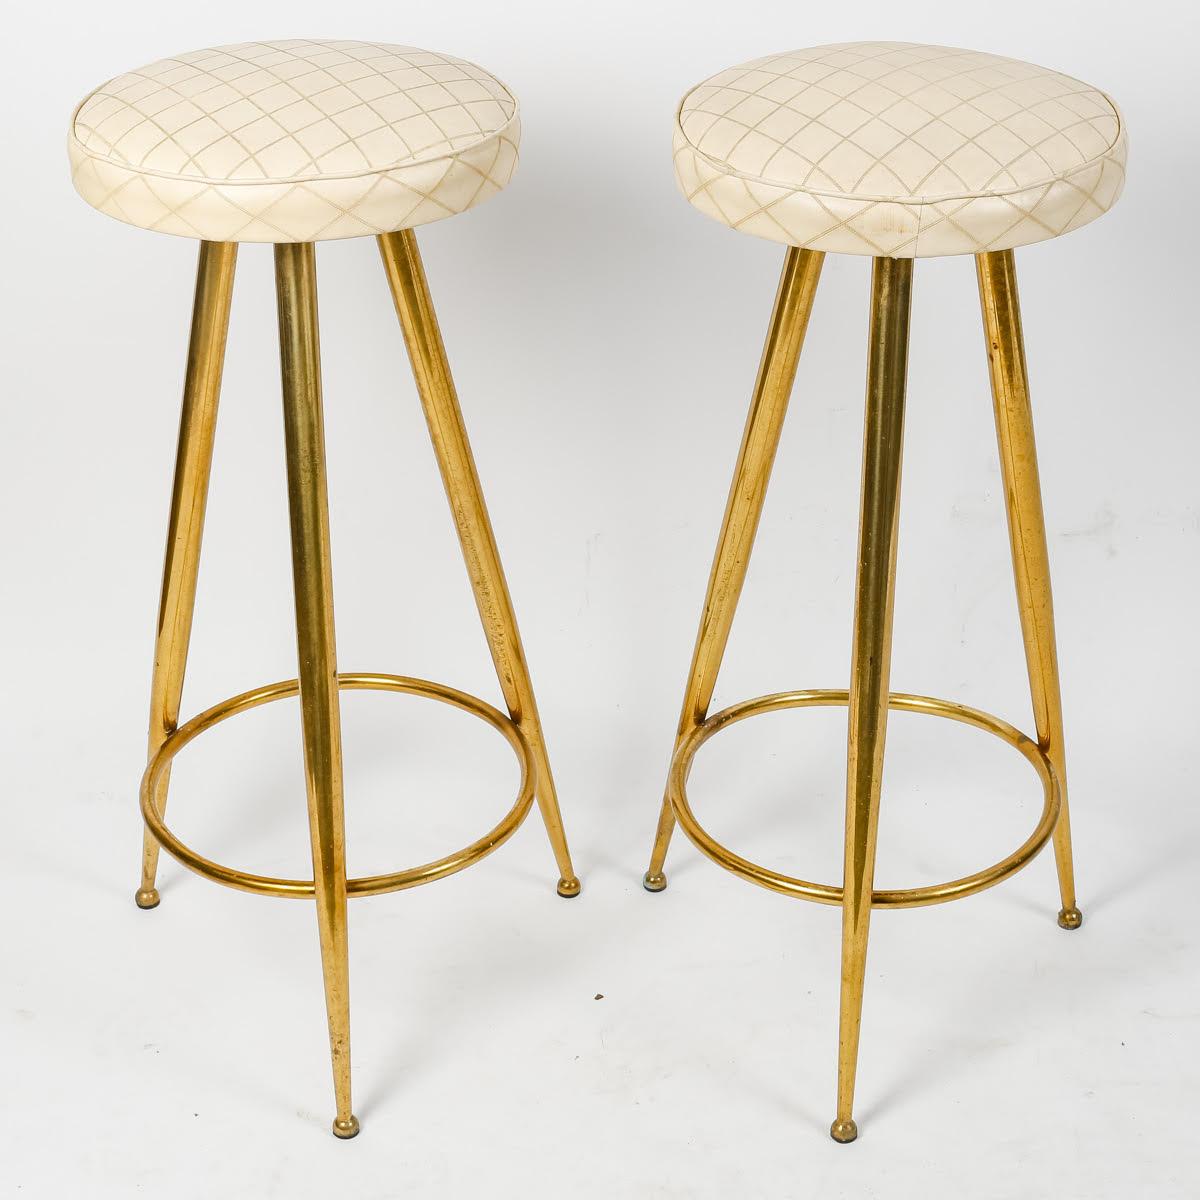 Mid-Century Modern Pair of Tripod Stools by Gio Ponti (1891-1979). For Sale